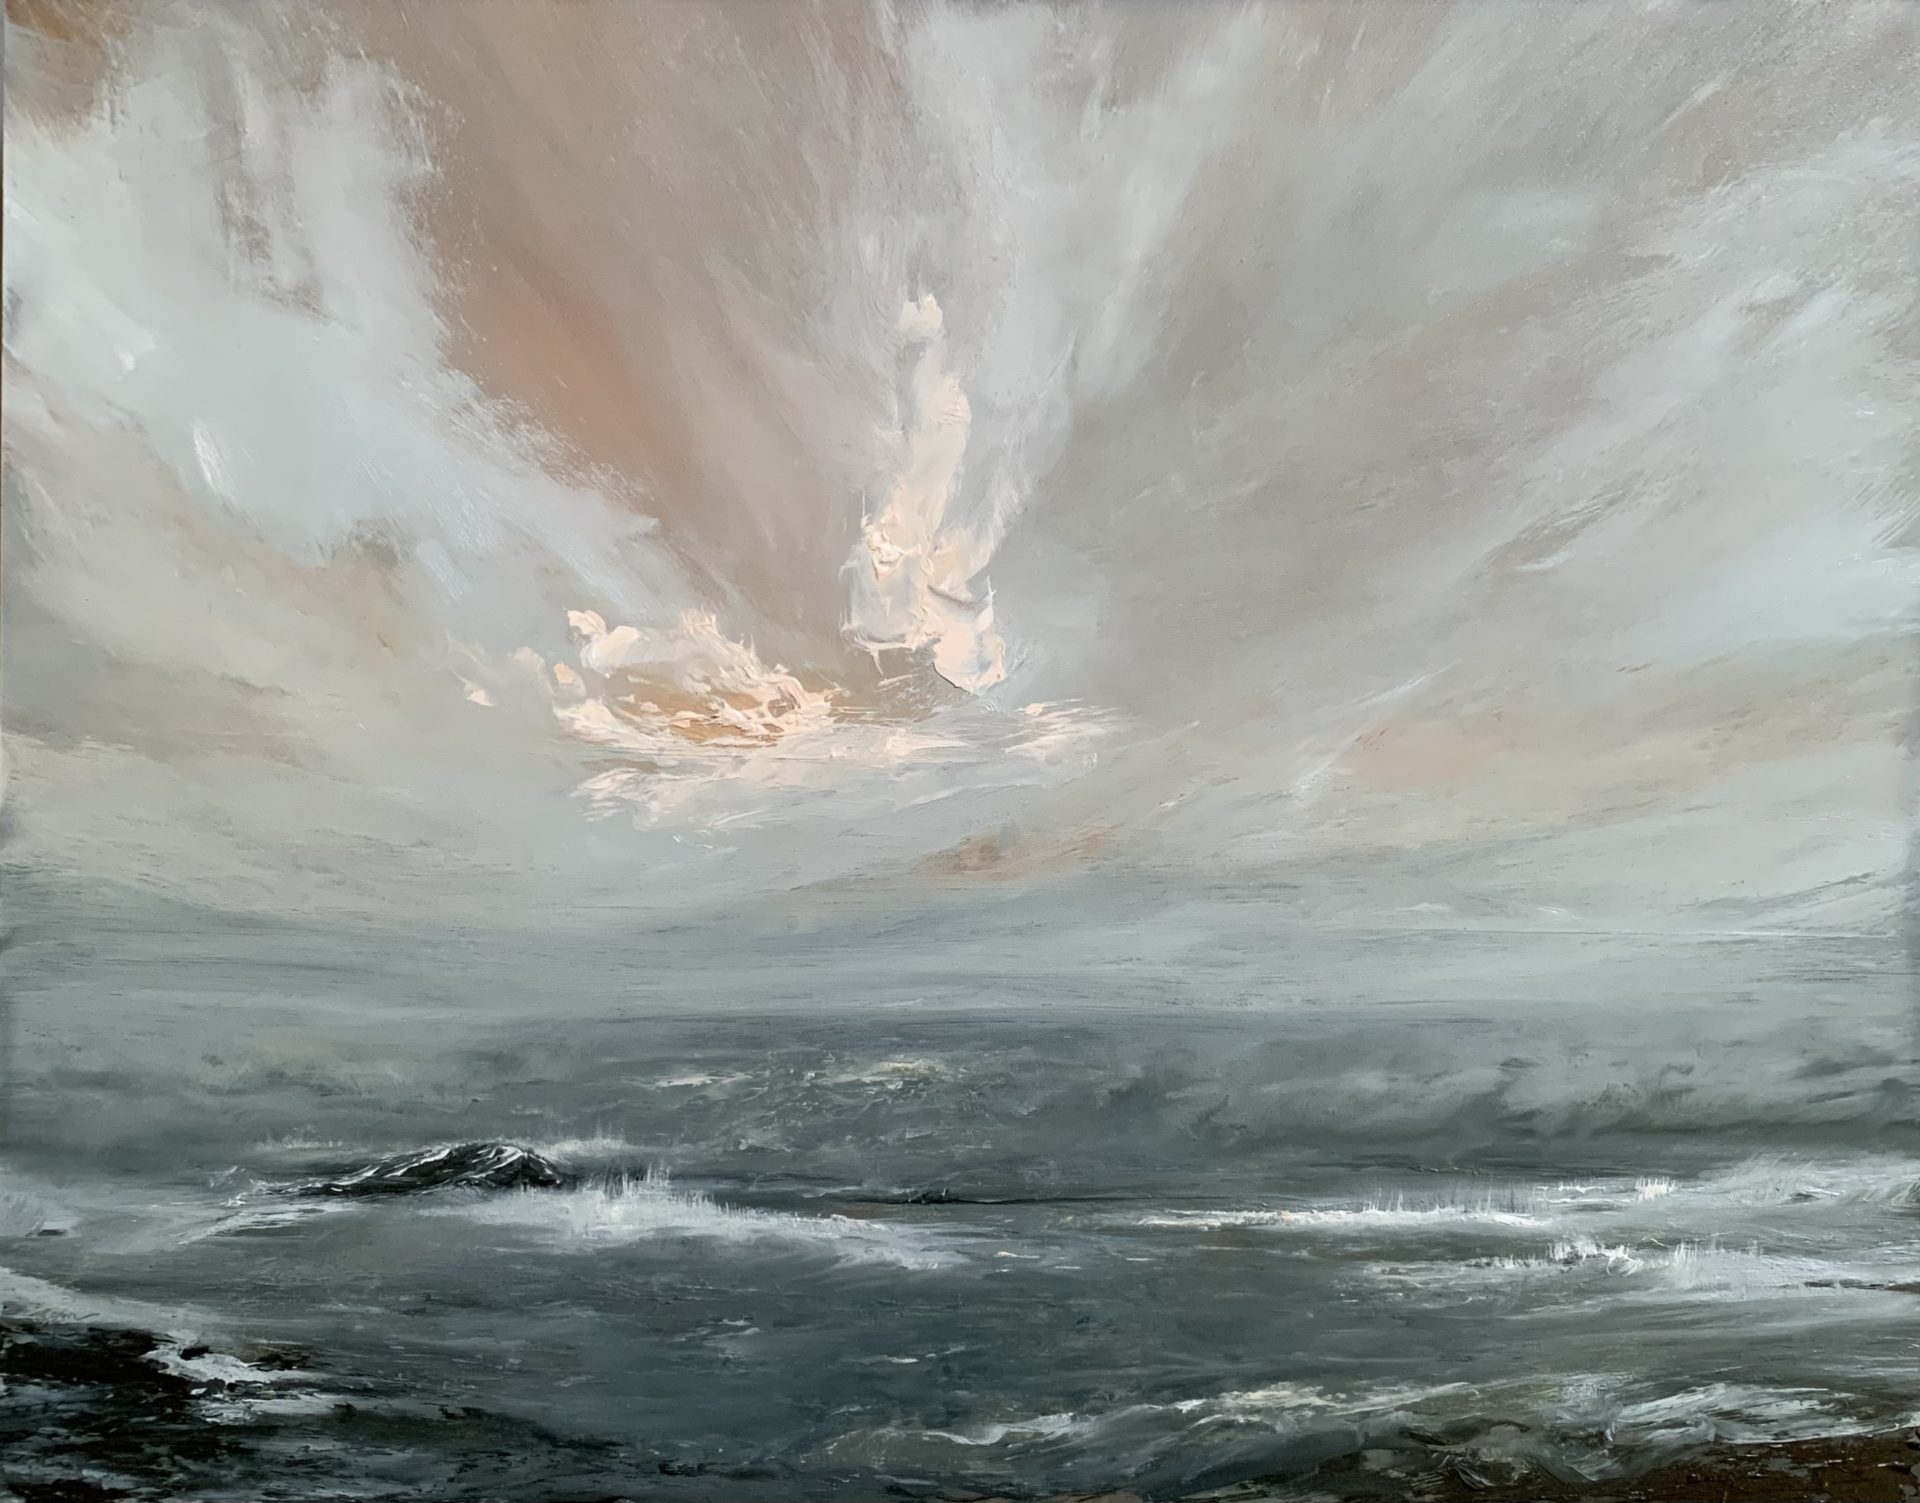 Original seascape oil painting by Tisha Mark, "A Little Light, At Last" 11"x14" oil on cradled gessobord (2024). Light emerges in an orange toned stormy sky over a stormy sea.